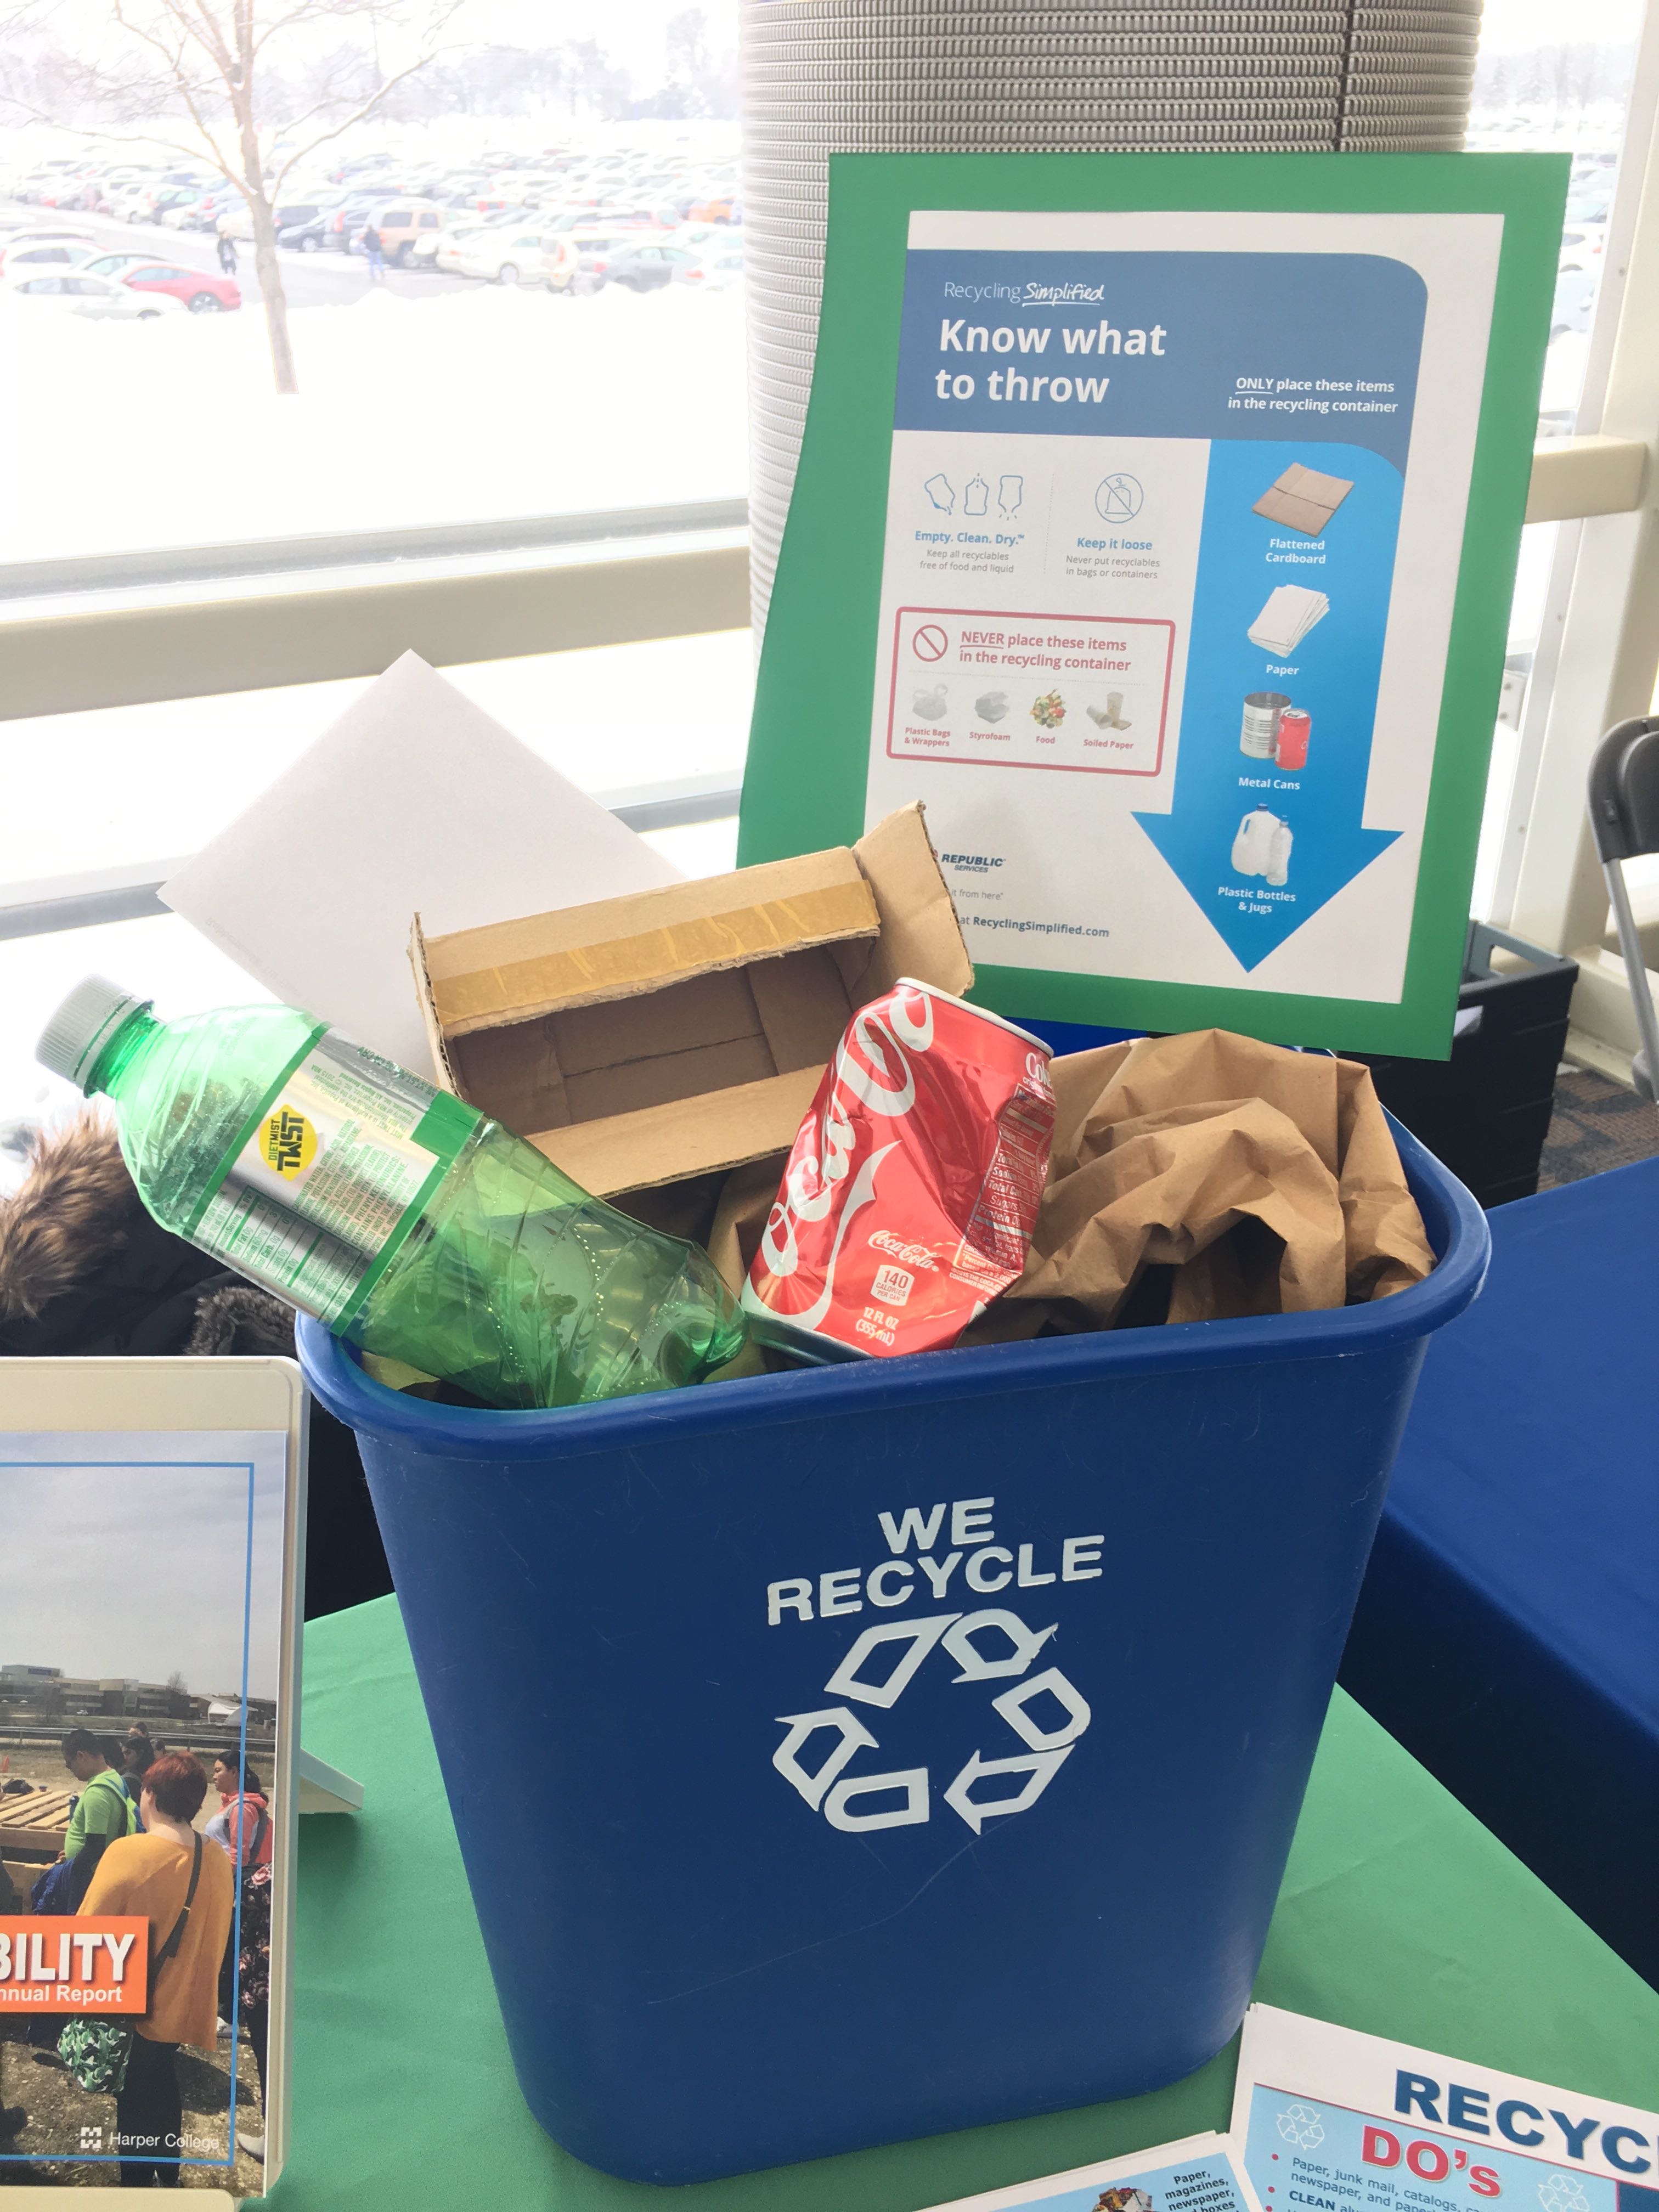 A recycling bin filled with recyclables sits on a table.